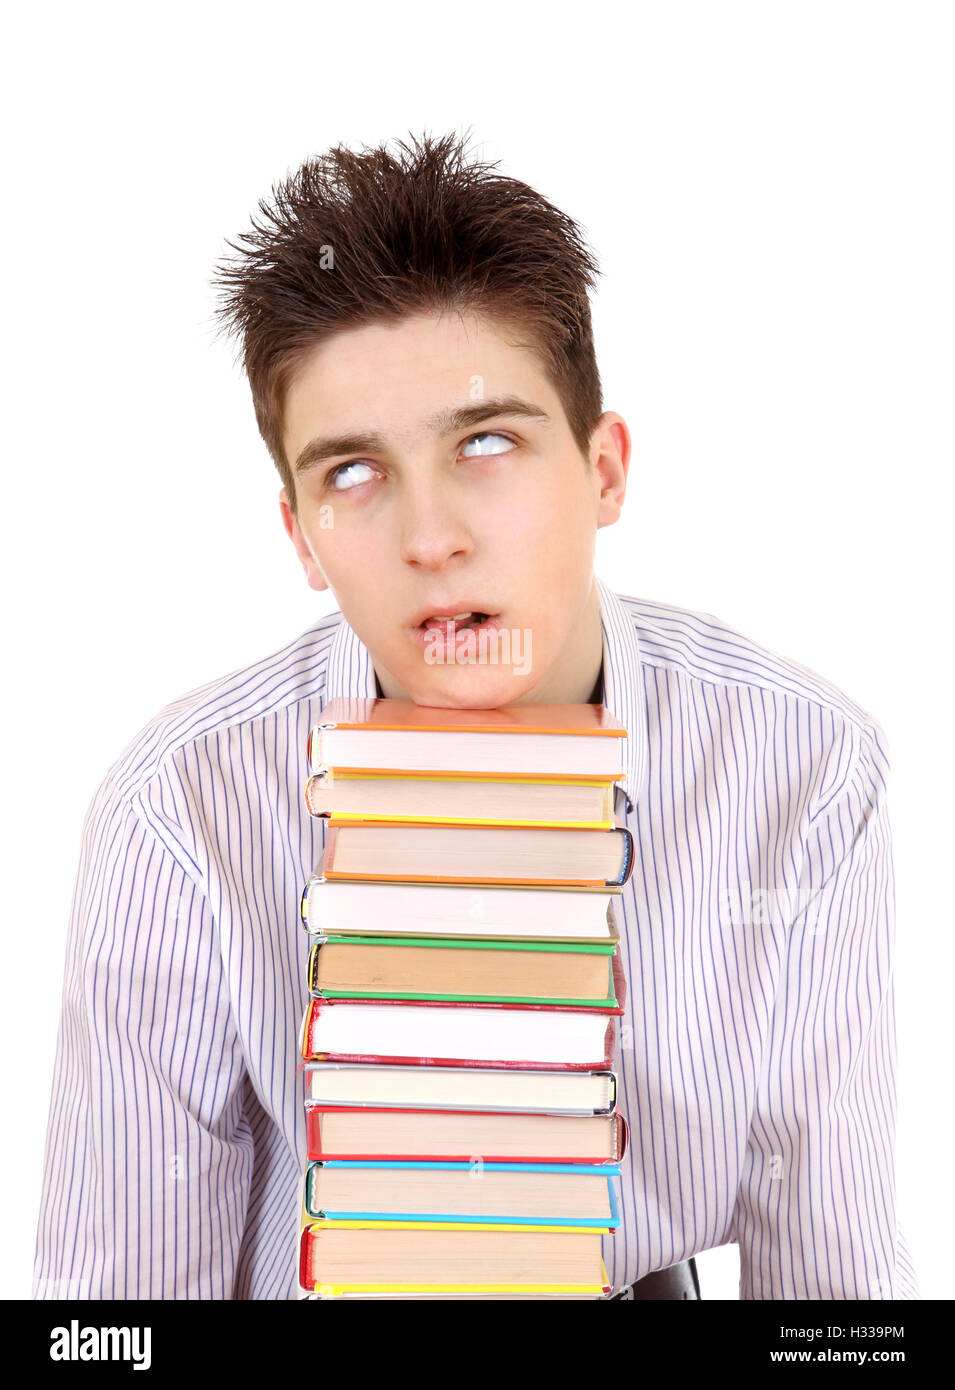 Annoyed Teenager with the Books Stock Photo